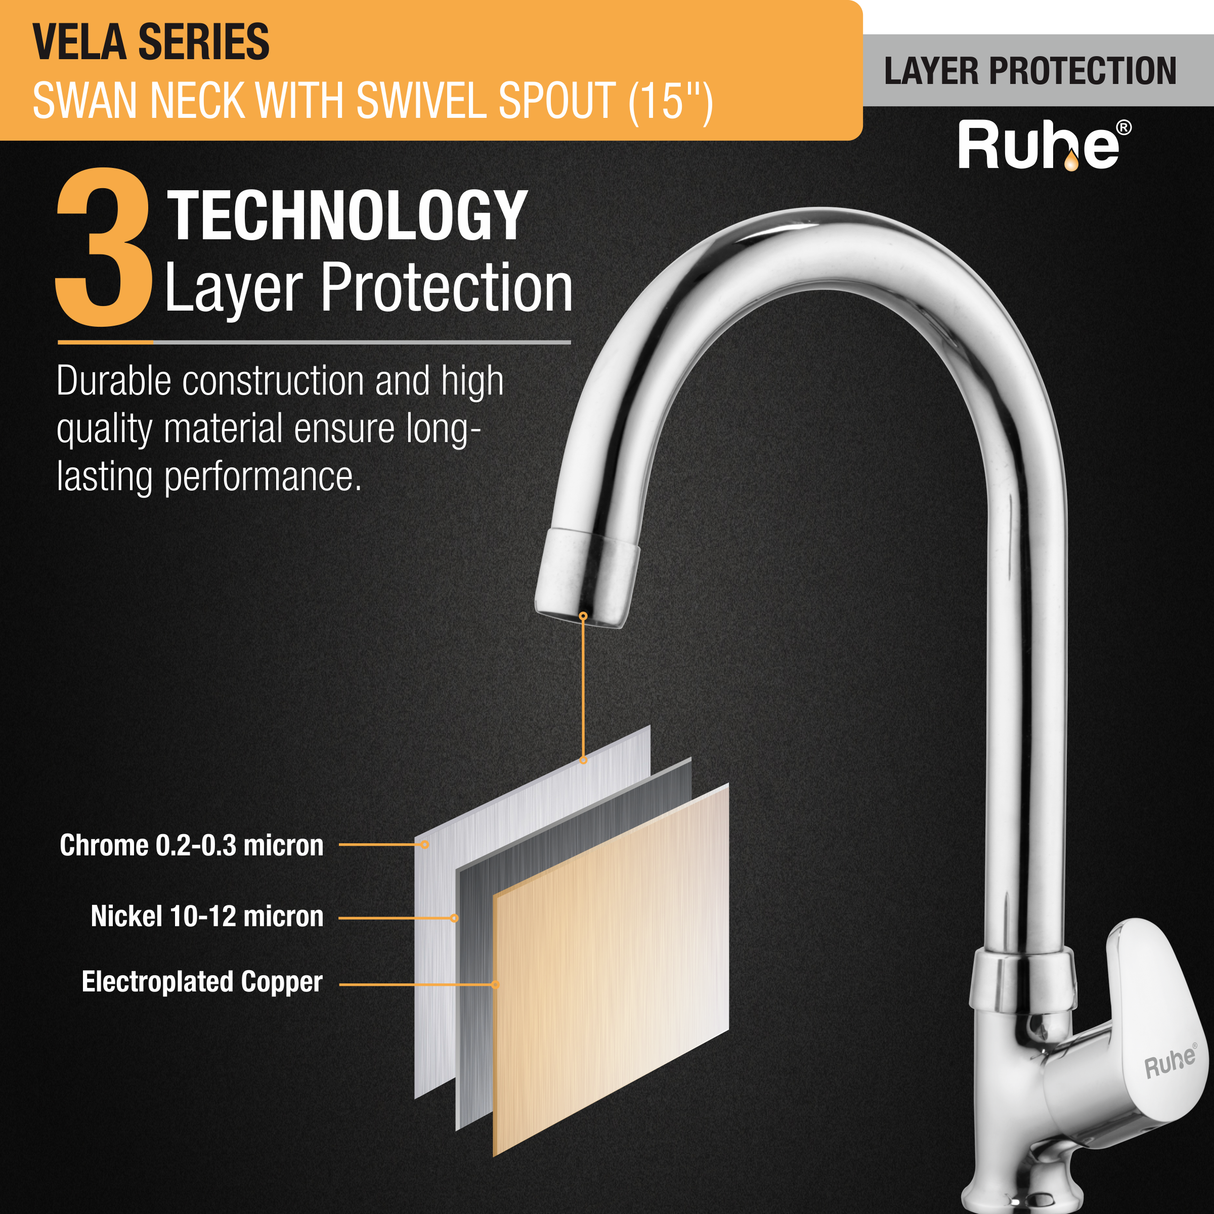 Vela Swan Neck with Medium (15 inches) Round Swivel Spout Faucet protection